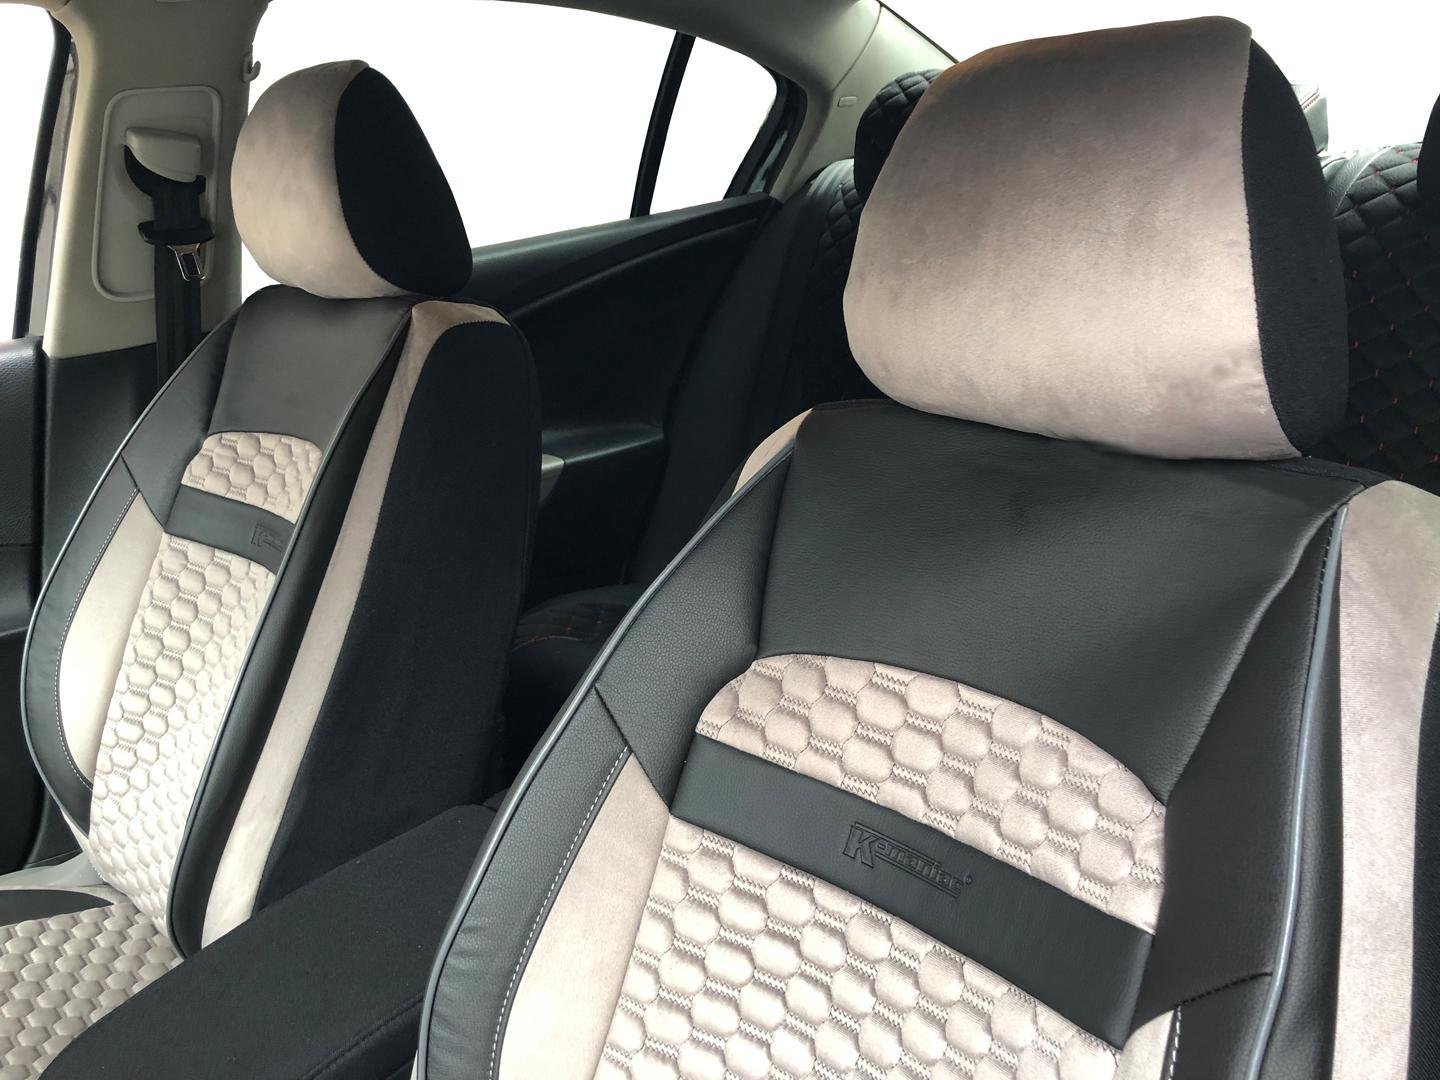 CAR SEAT COVER FOR PEUGEOT 206 DRIVER SEAT BLACK GREY TRIANGLES